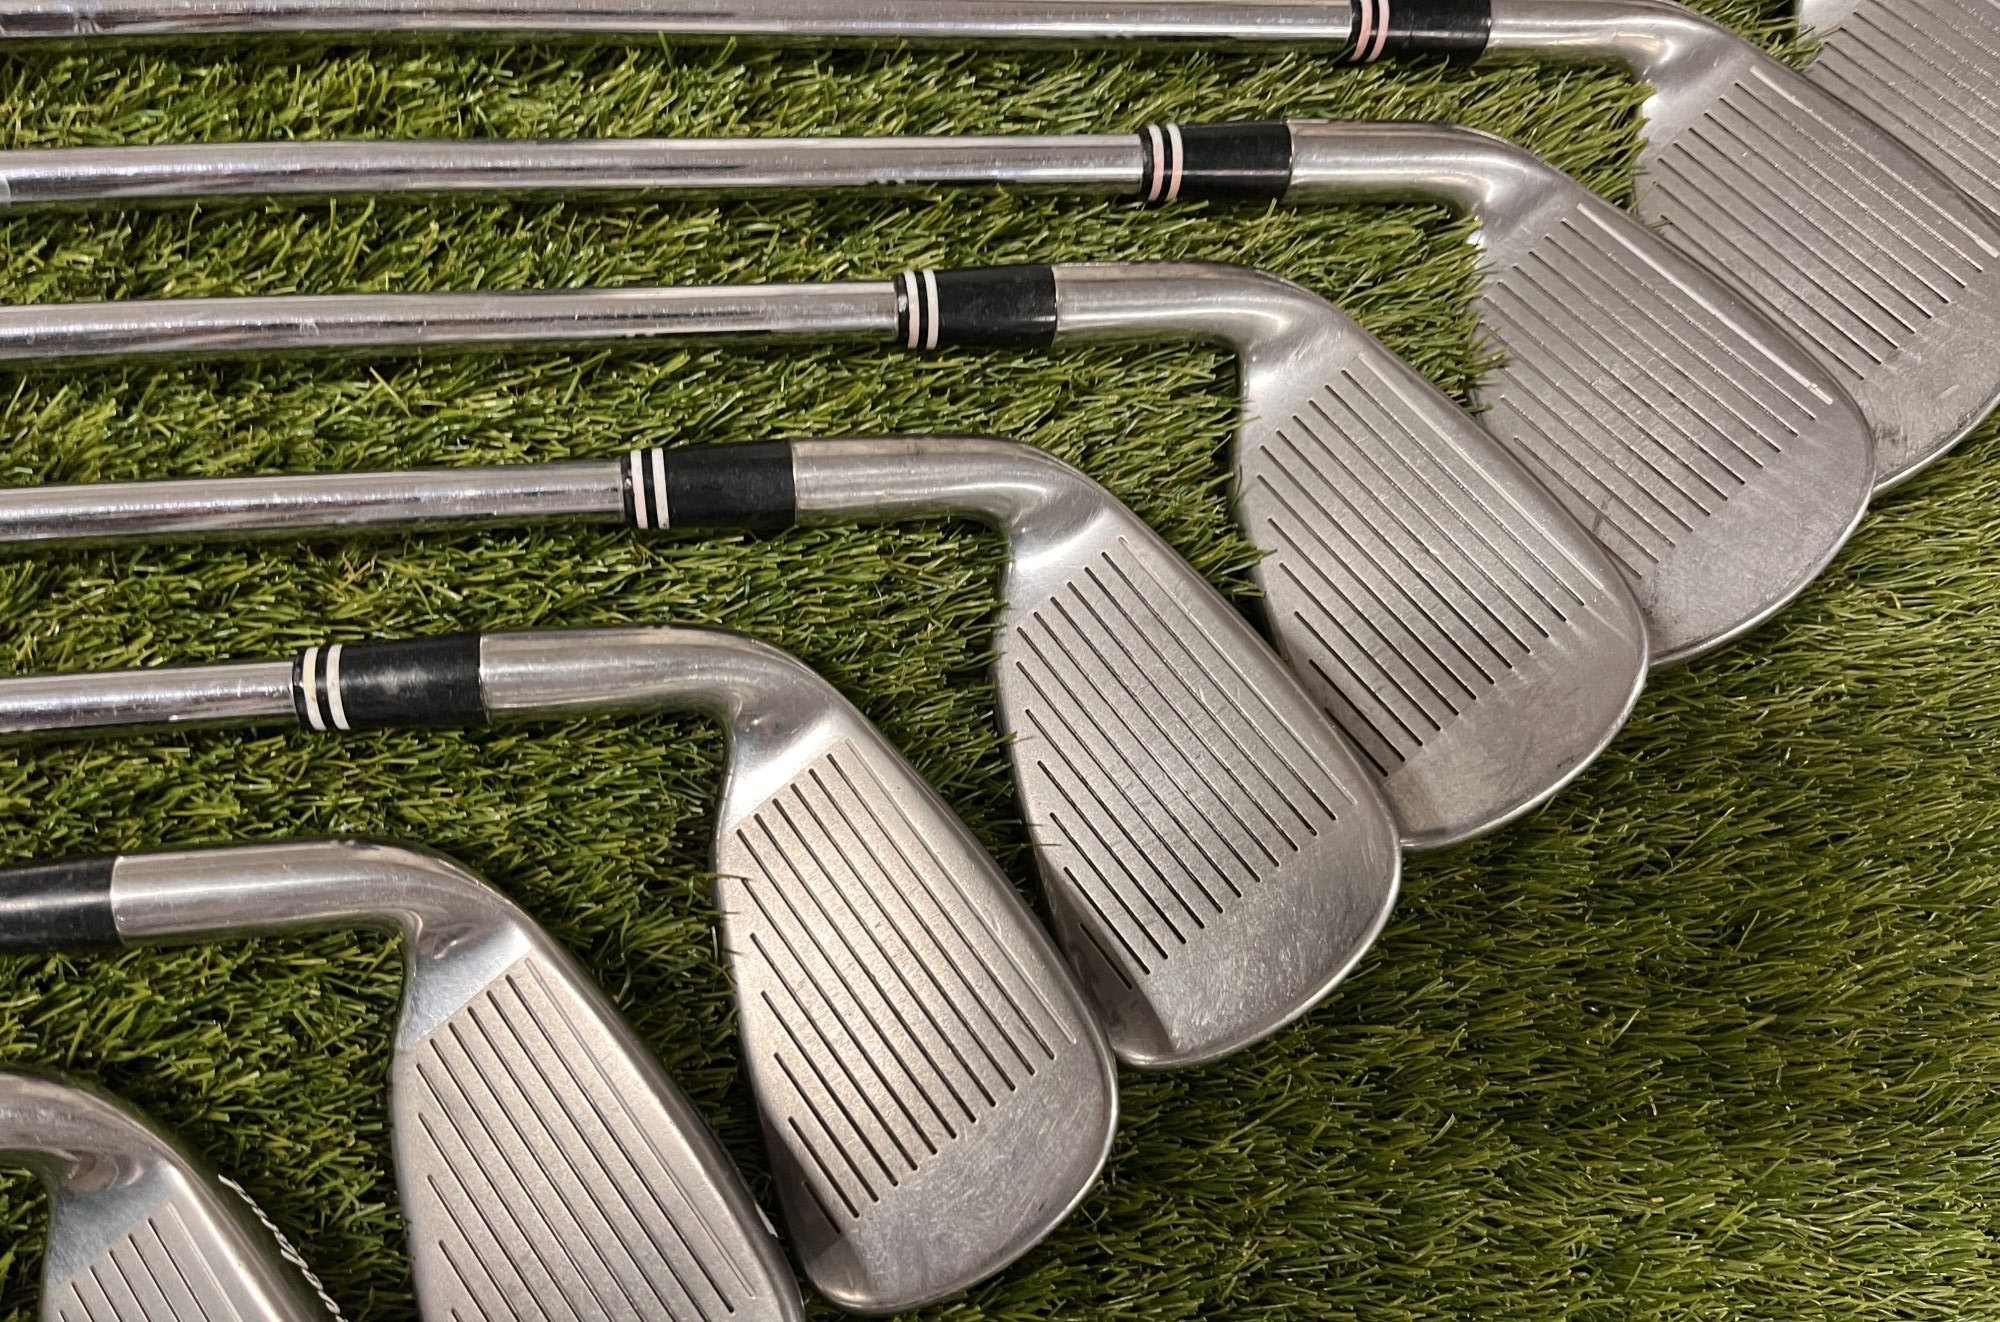 Are the Cleveland Tour Action Irons Forgiving for High Handicappers?